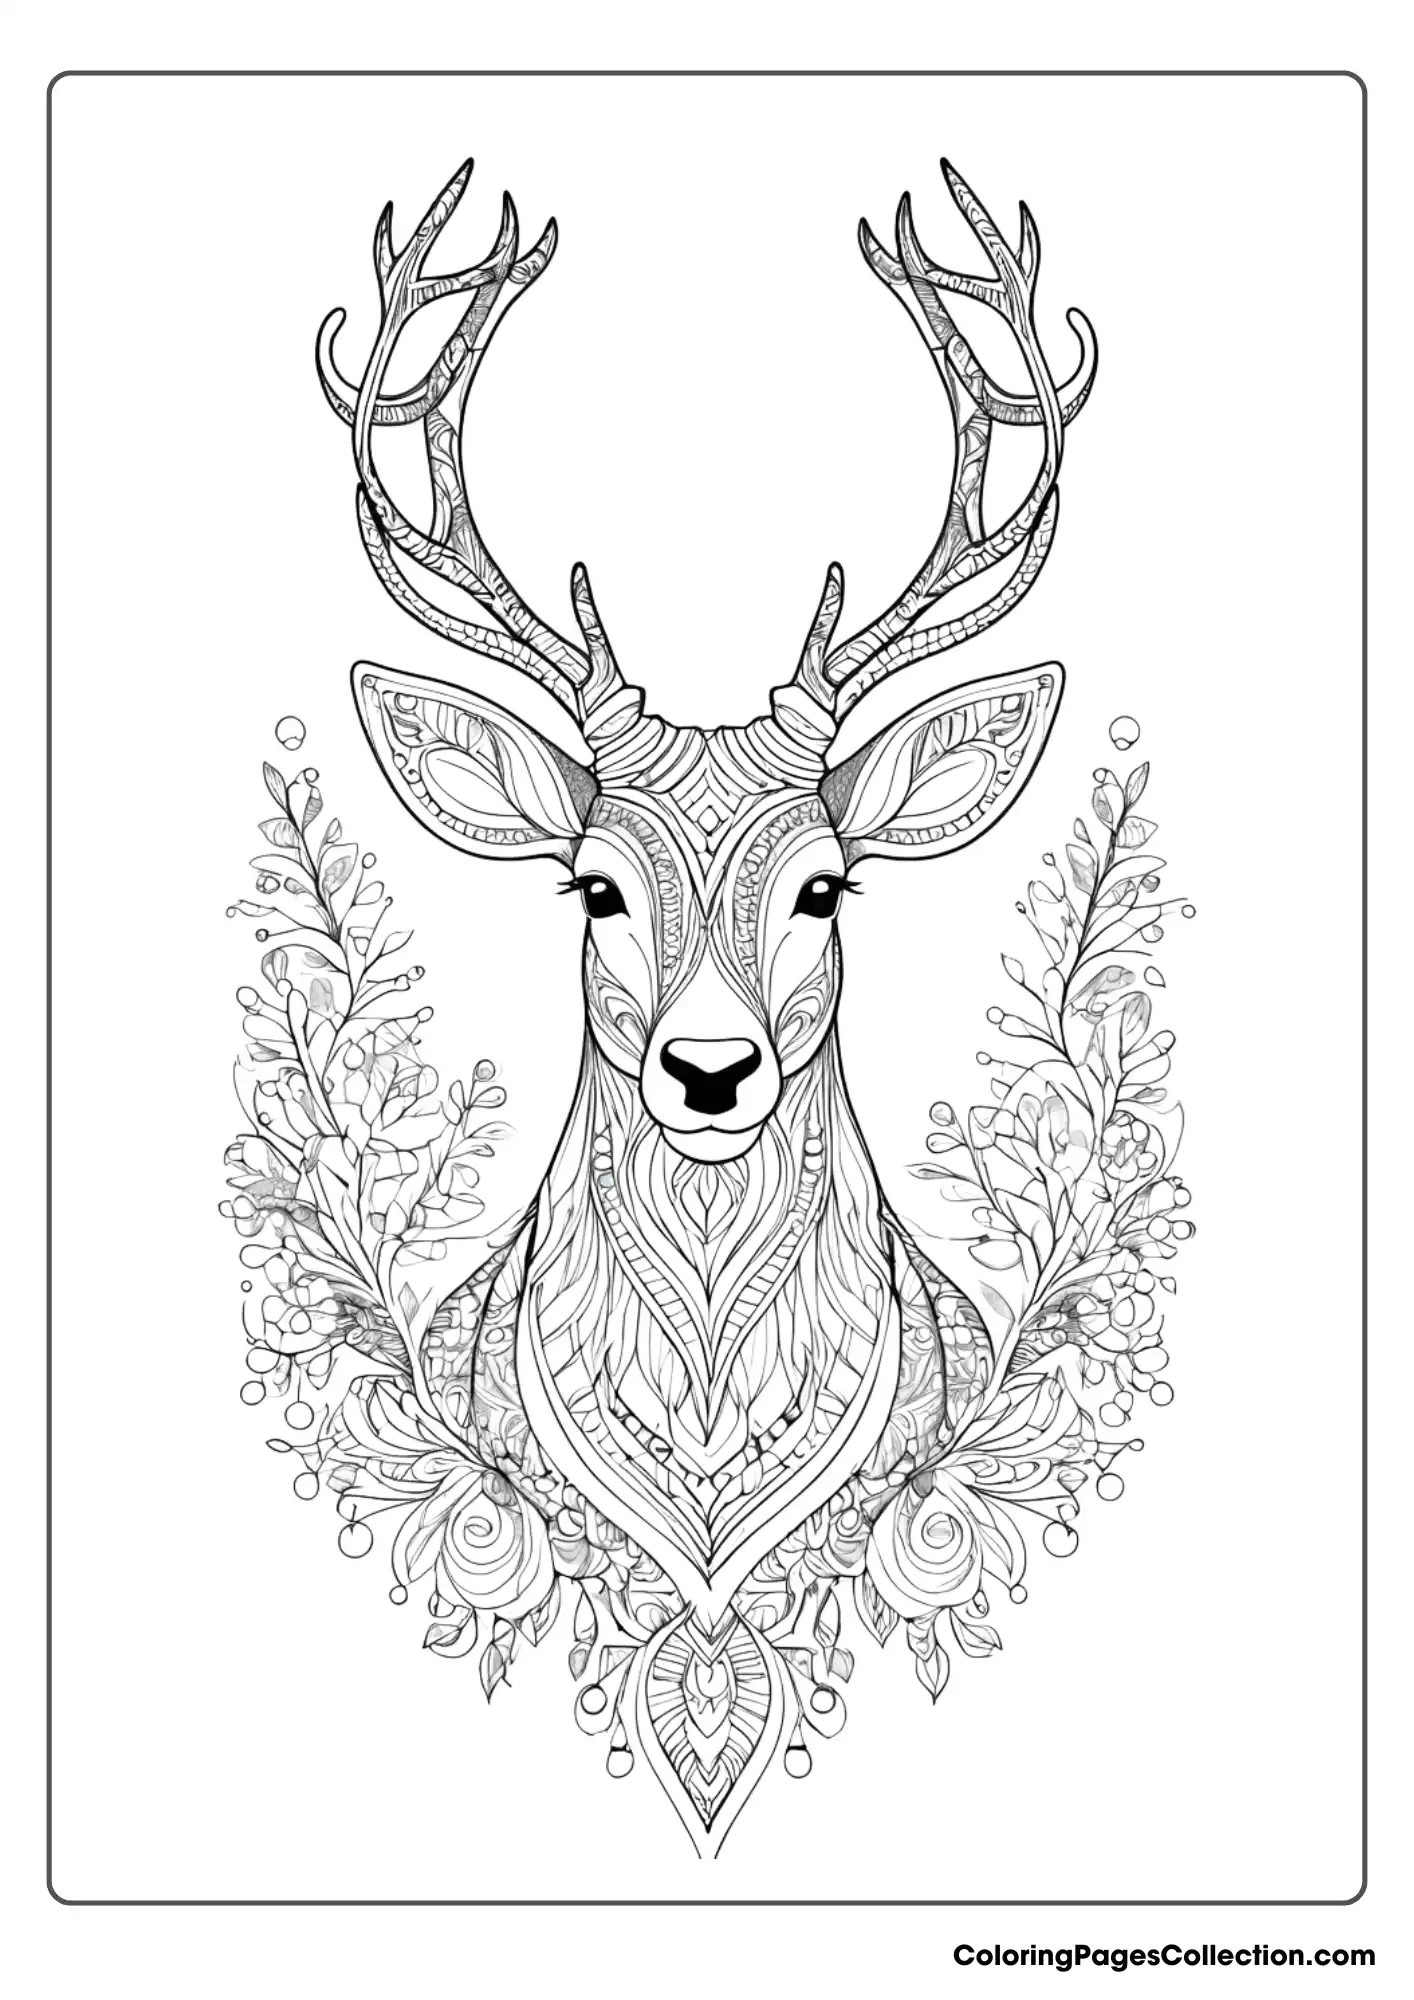 Coloring pages for teens, Reindeer with Floral Art